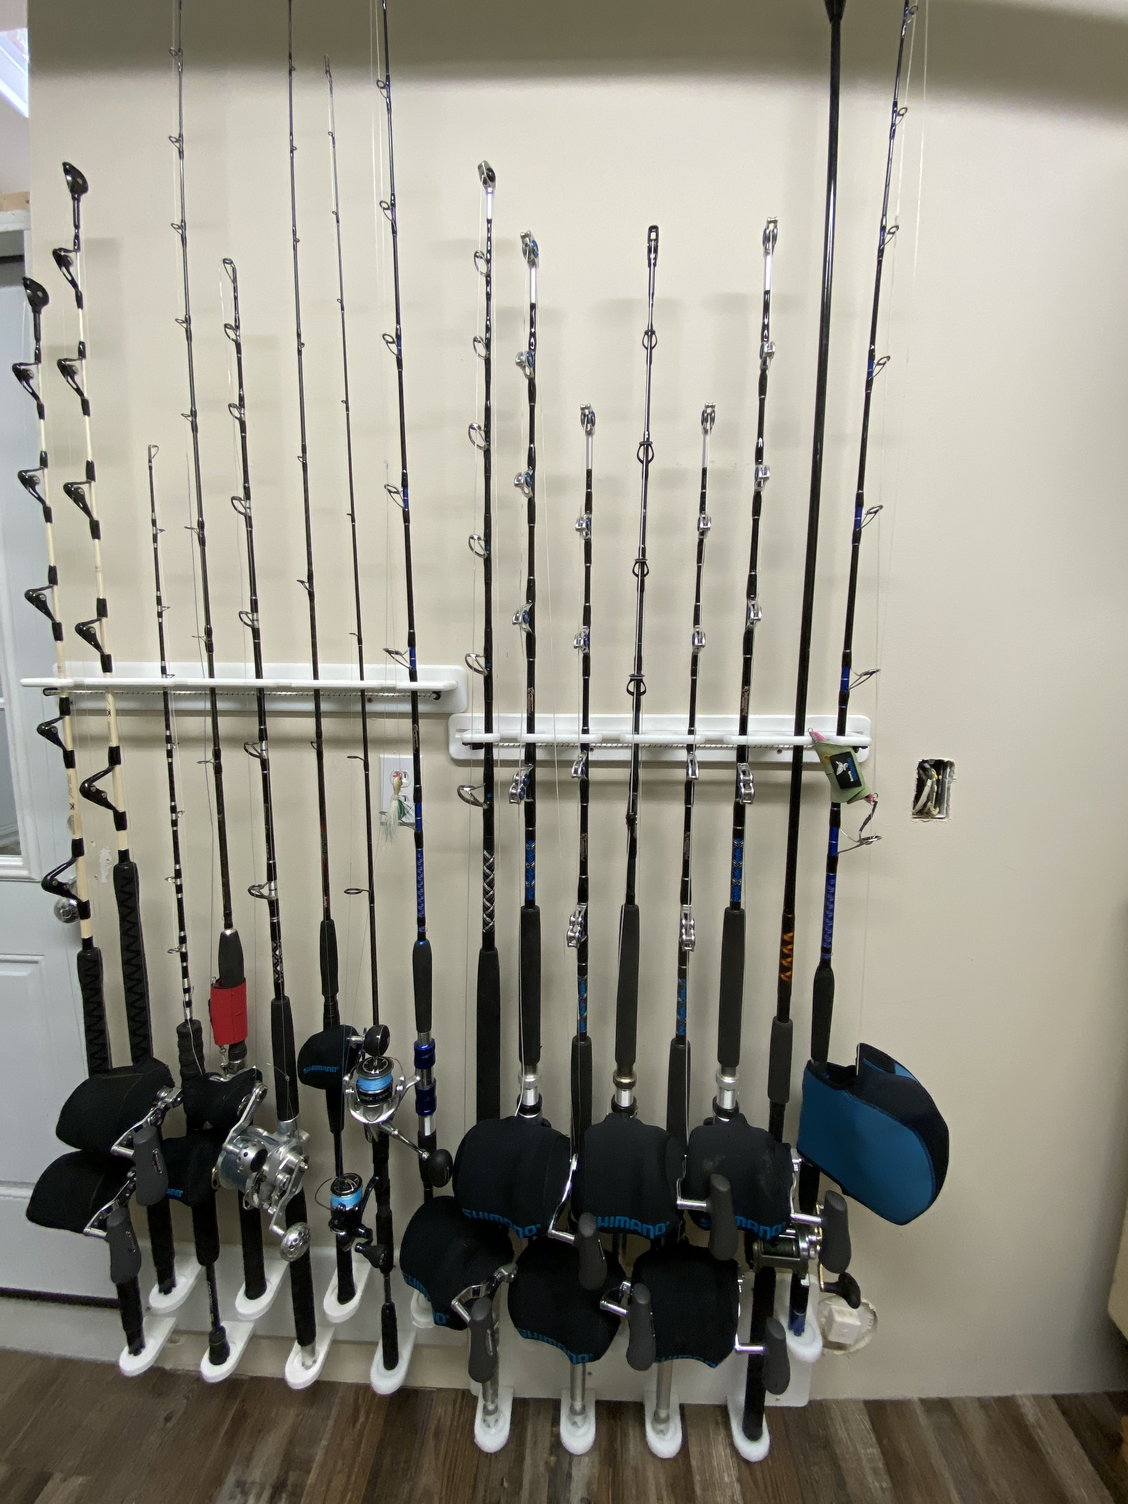 Vertical fishing rod rack - The Hull Truth - Boating and Fishing Forum